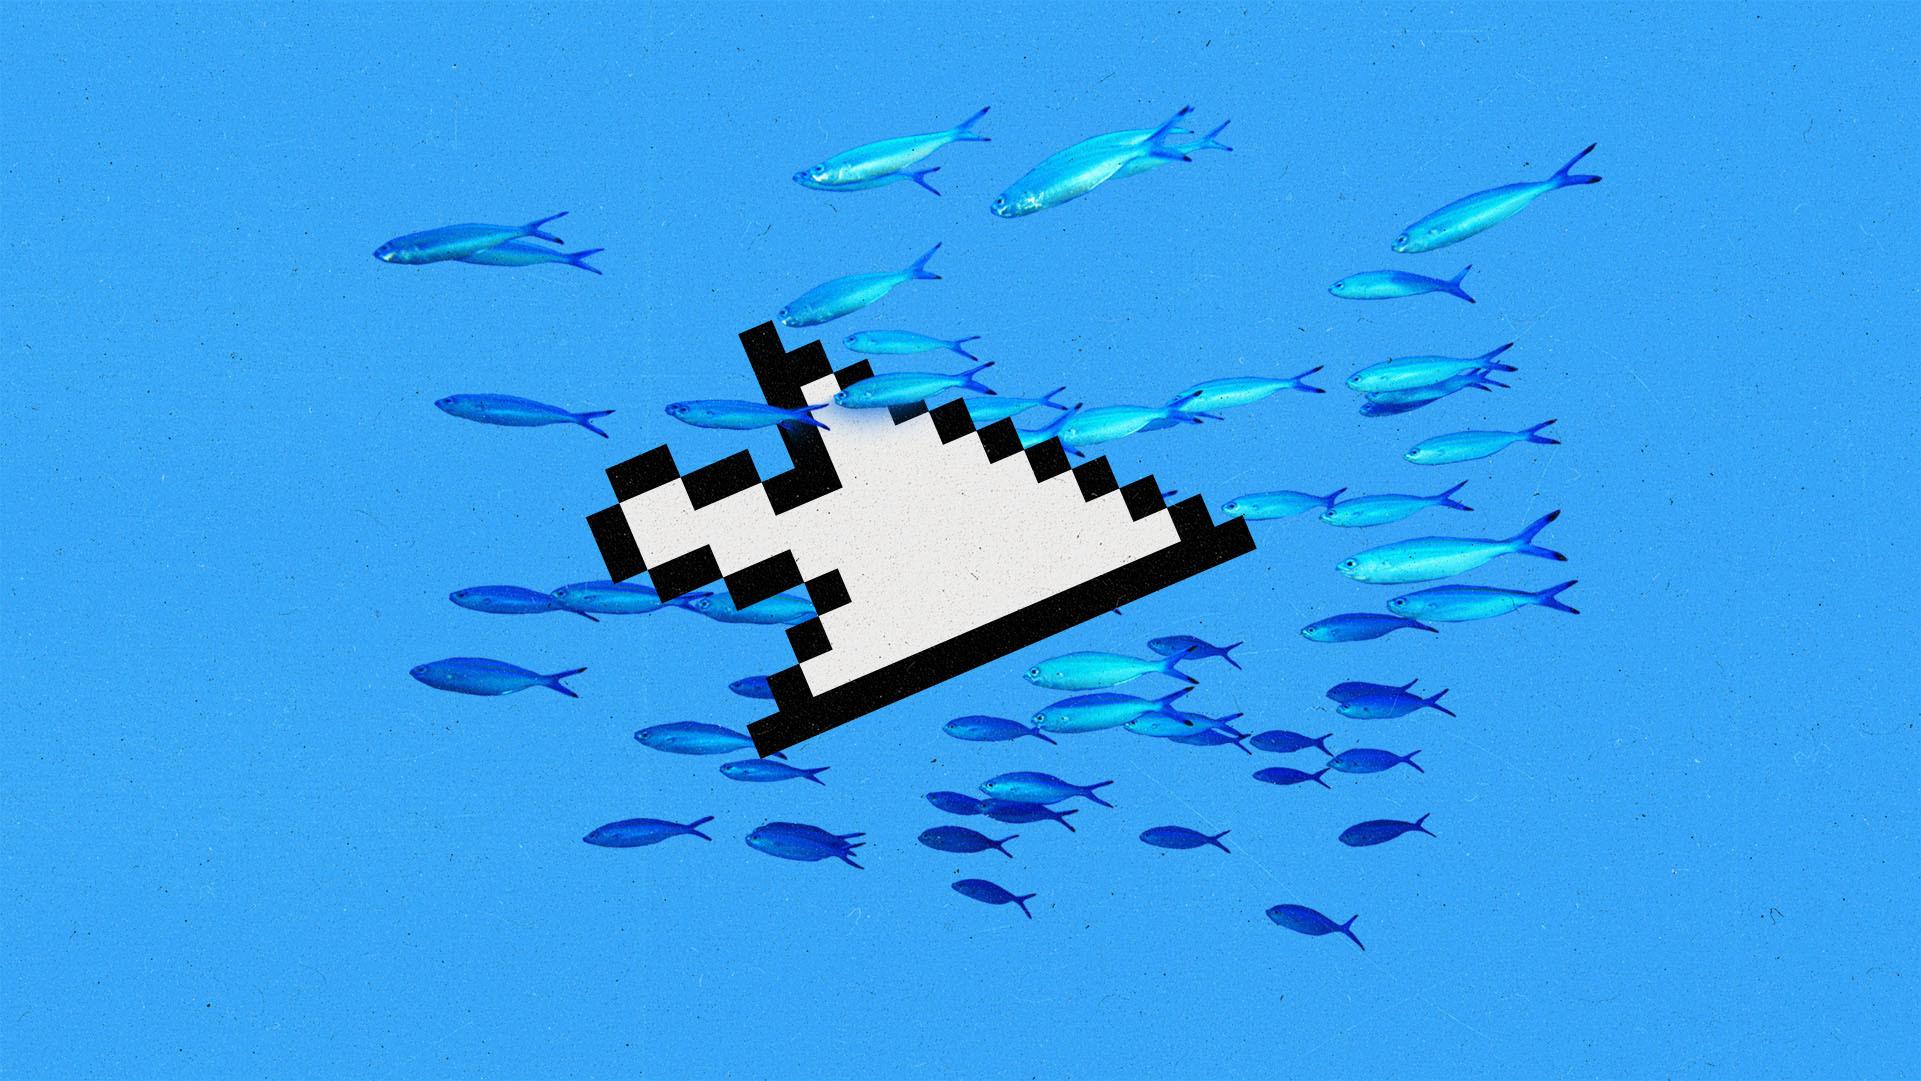 A cursor 'swimming' in the opposite direction of a school of fish, on a blue background.